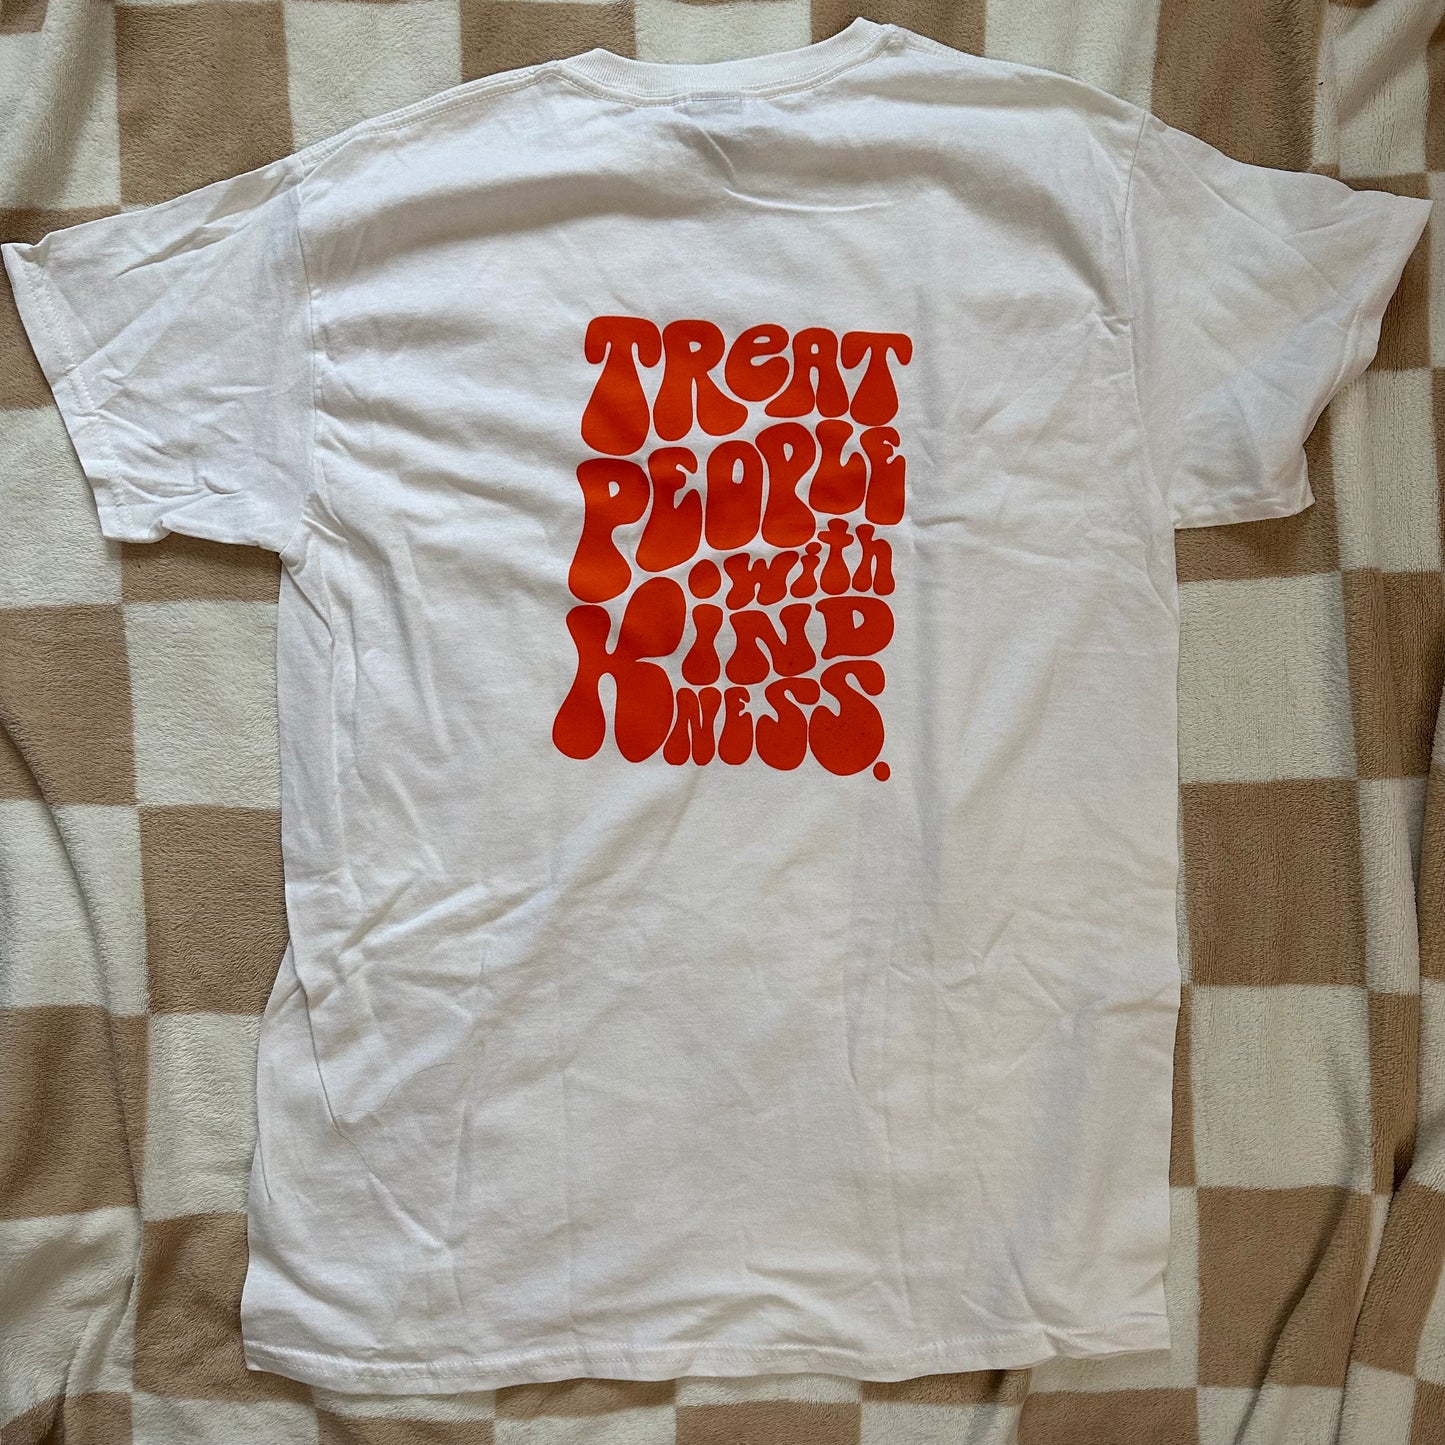 TPWK Tee - S - No flaws